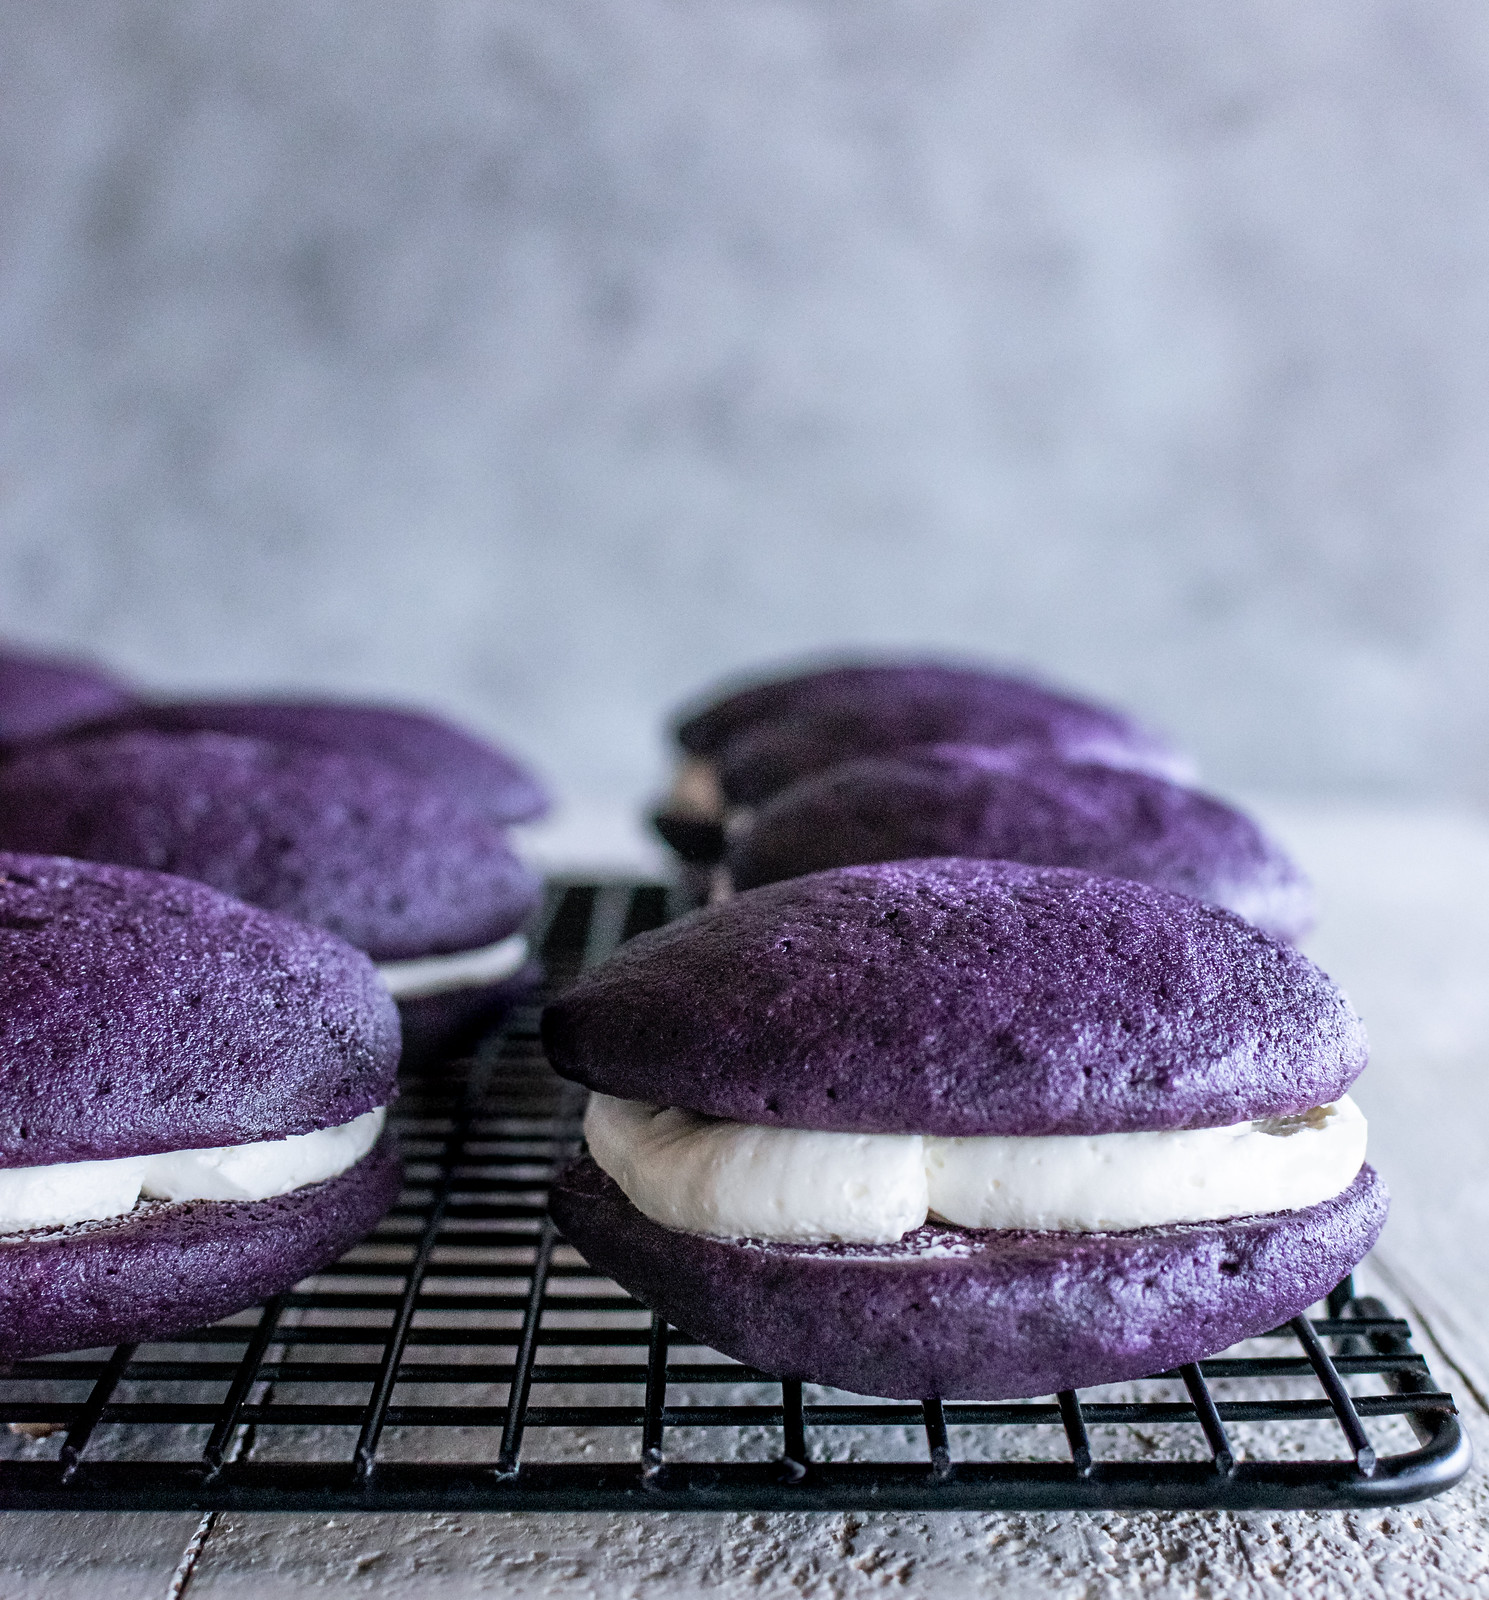 ube whoopie pies are here to brighten your day